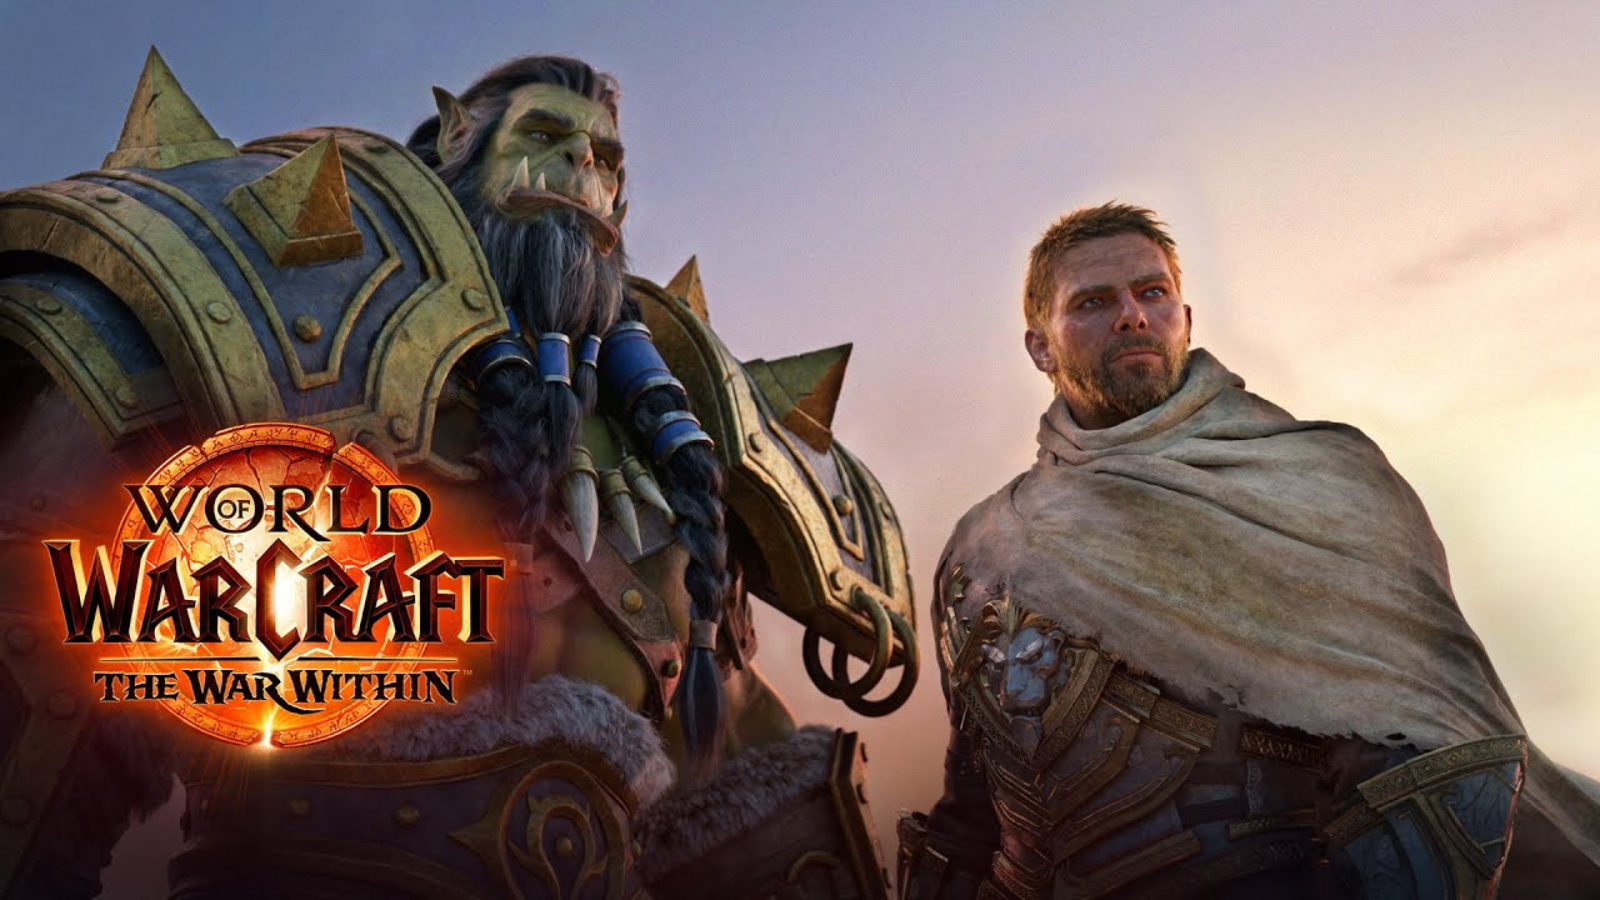 It’s About Time For You To Discover the Magical World of Warcraft